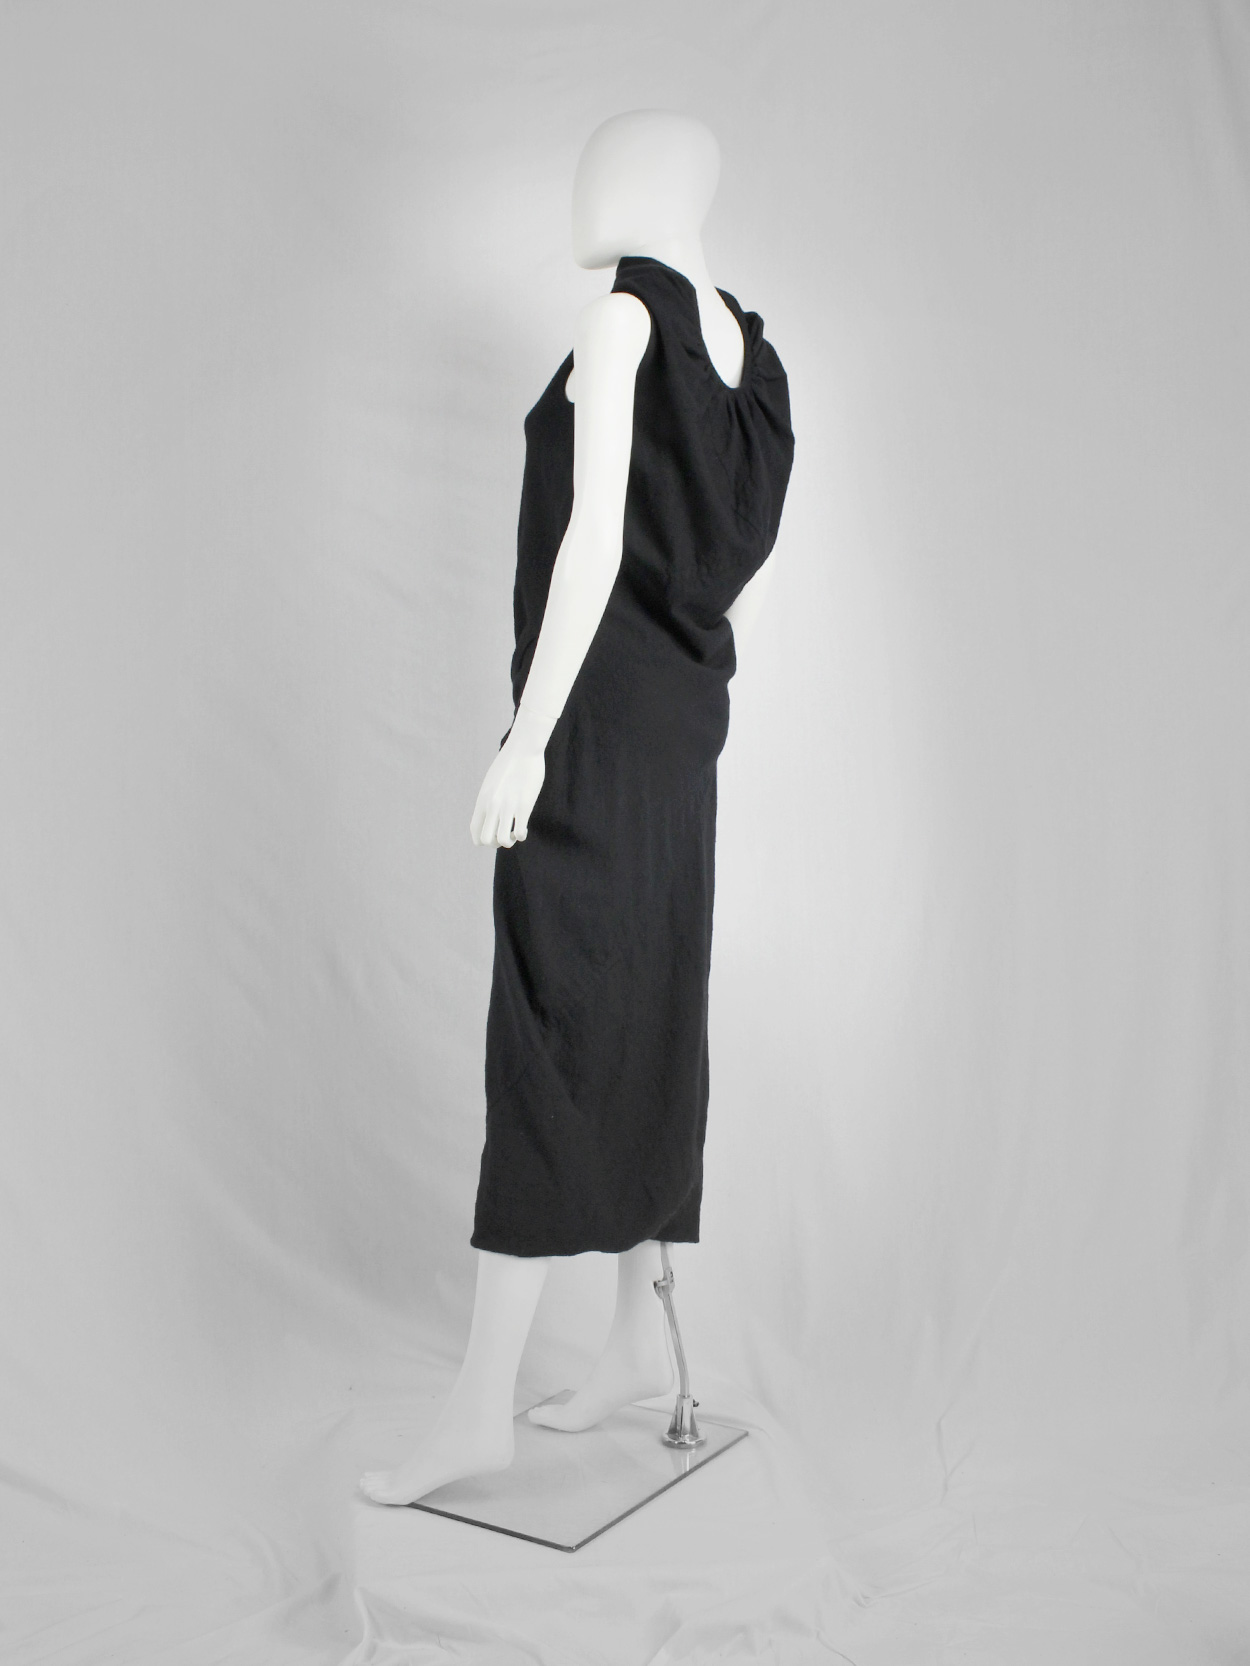 vaniitas Rick Owens STAG black dress with high neck and dropped waist fall 2008 3738